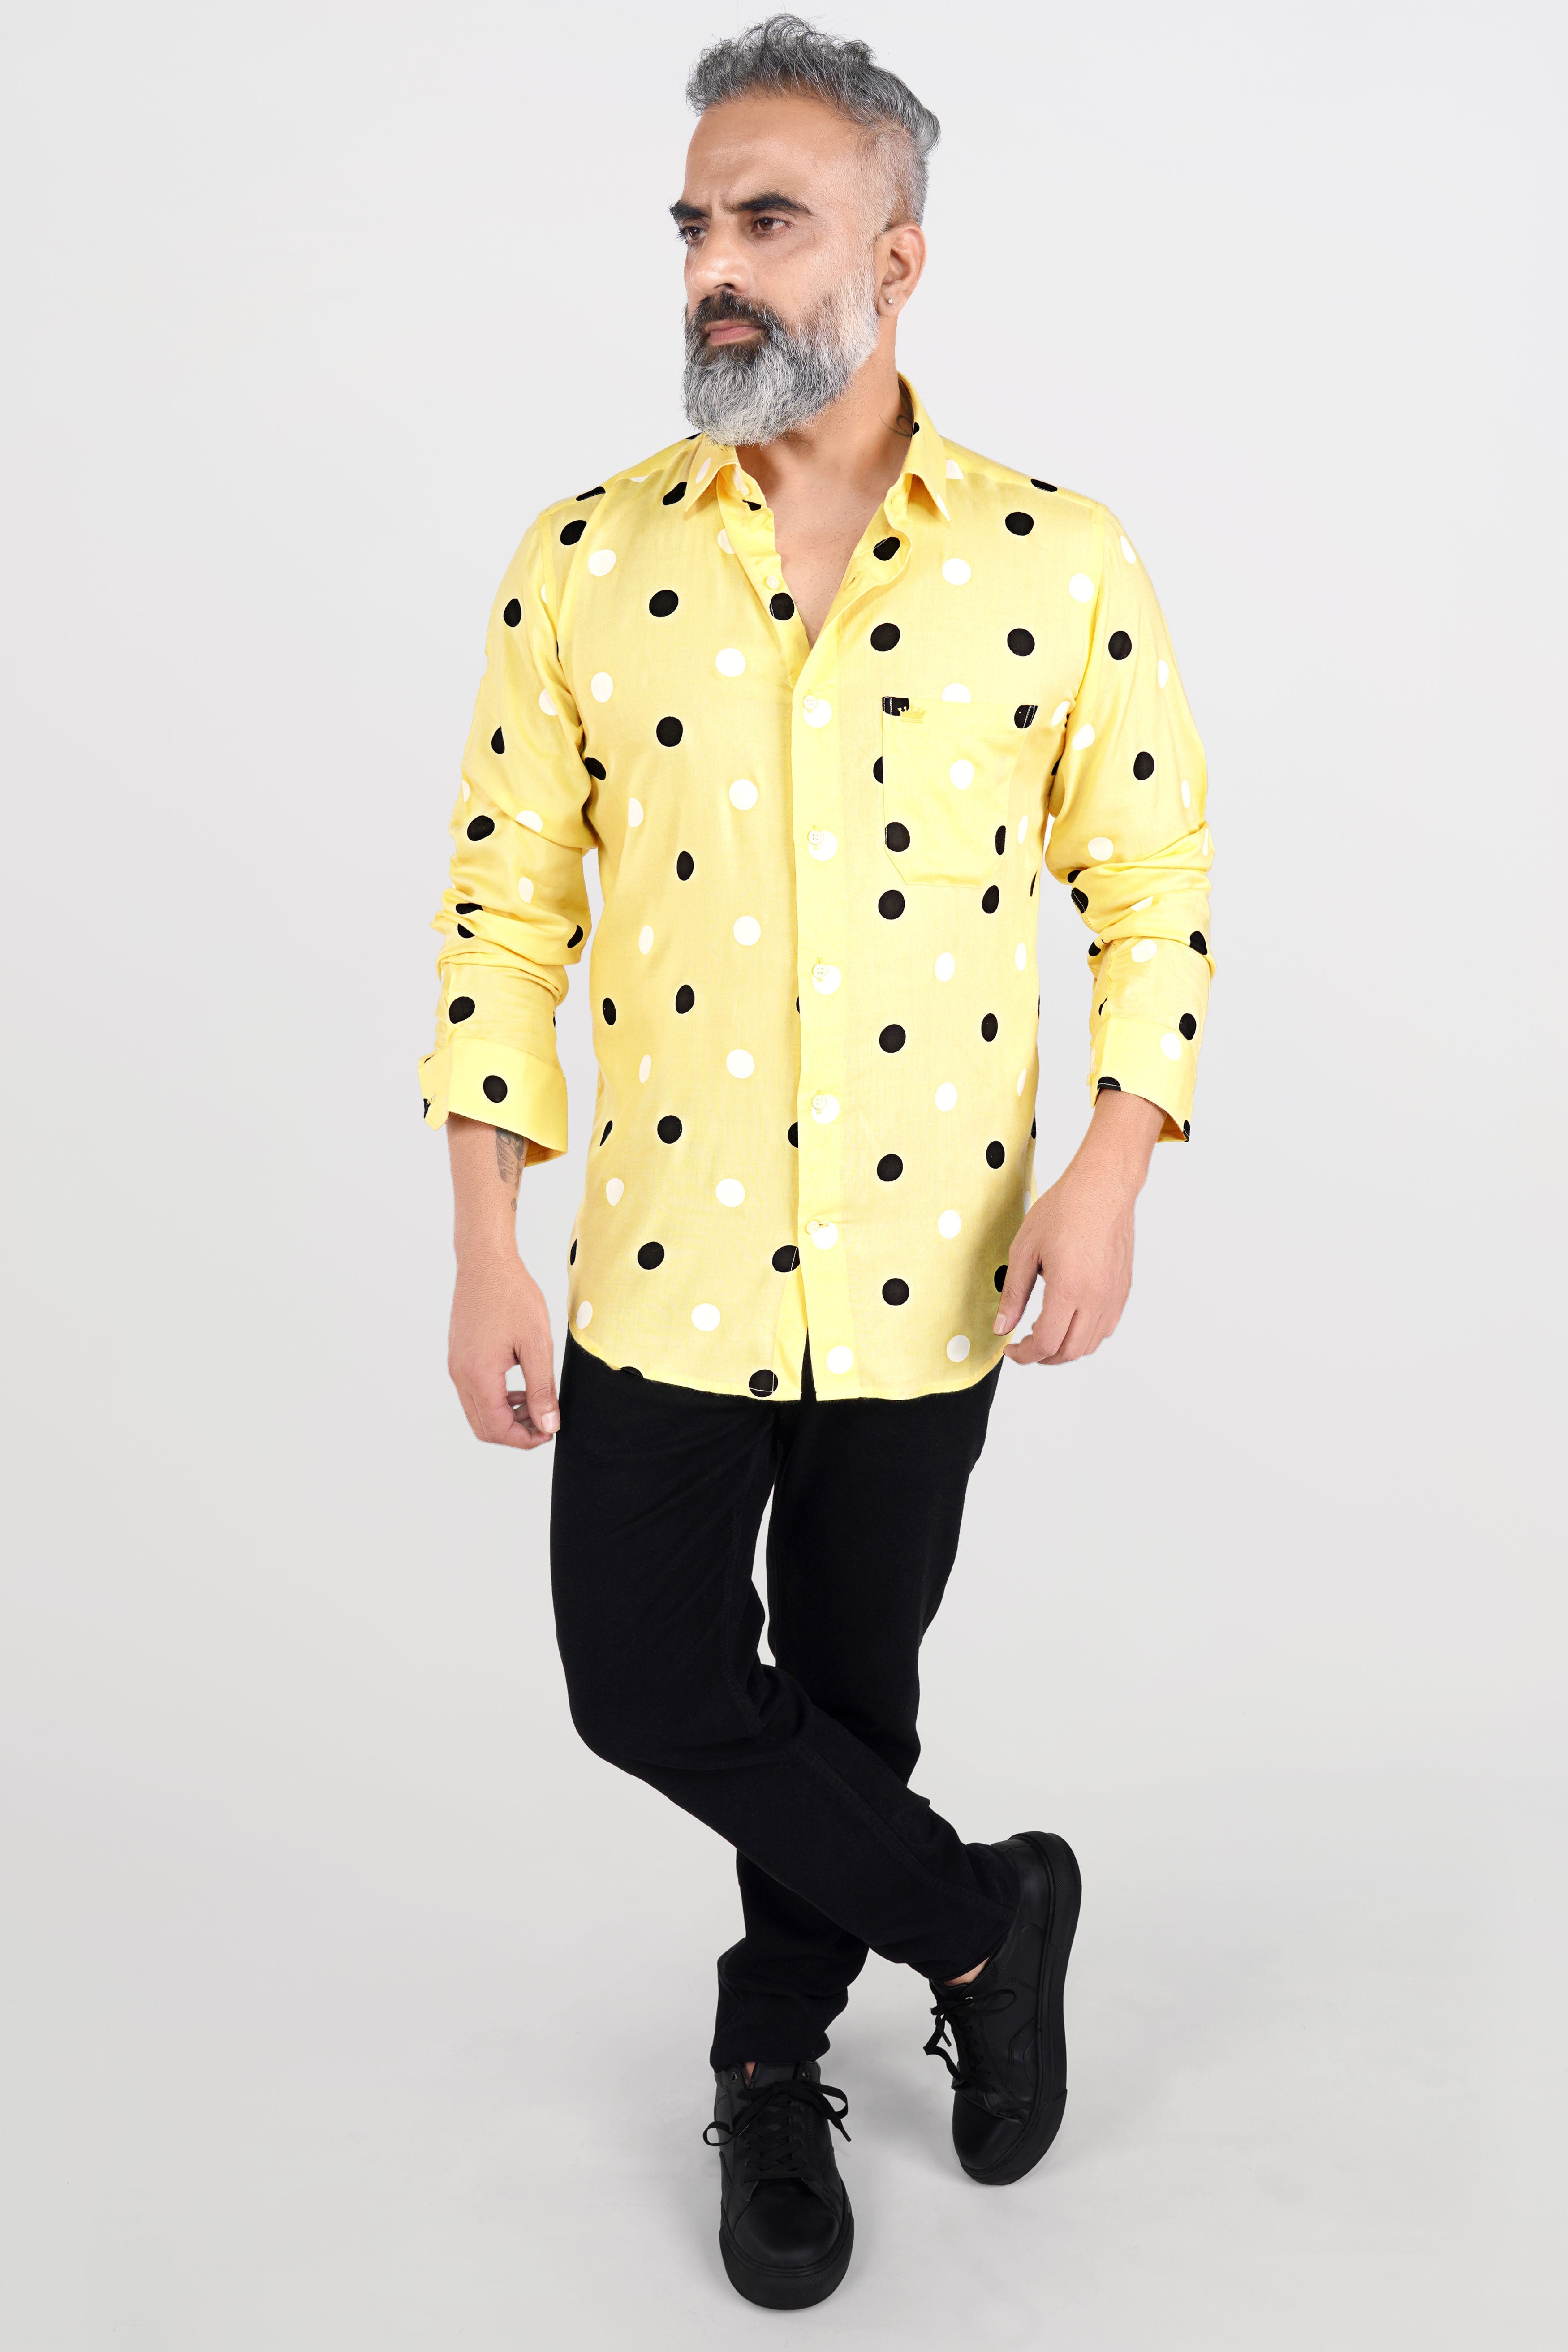 Parchment Yellow with Black and White Polka Dotted Premium Cotton Shirt